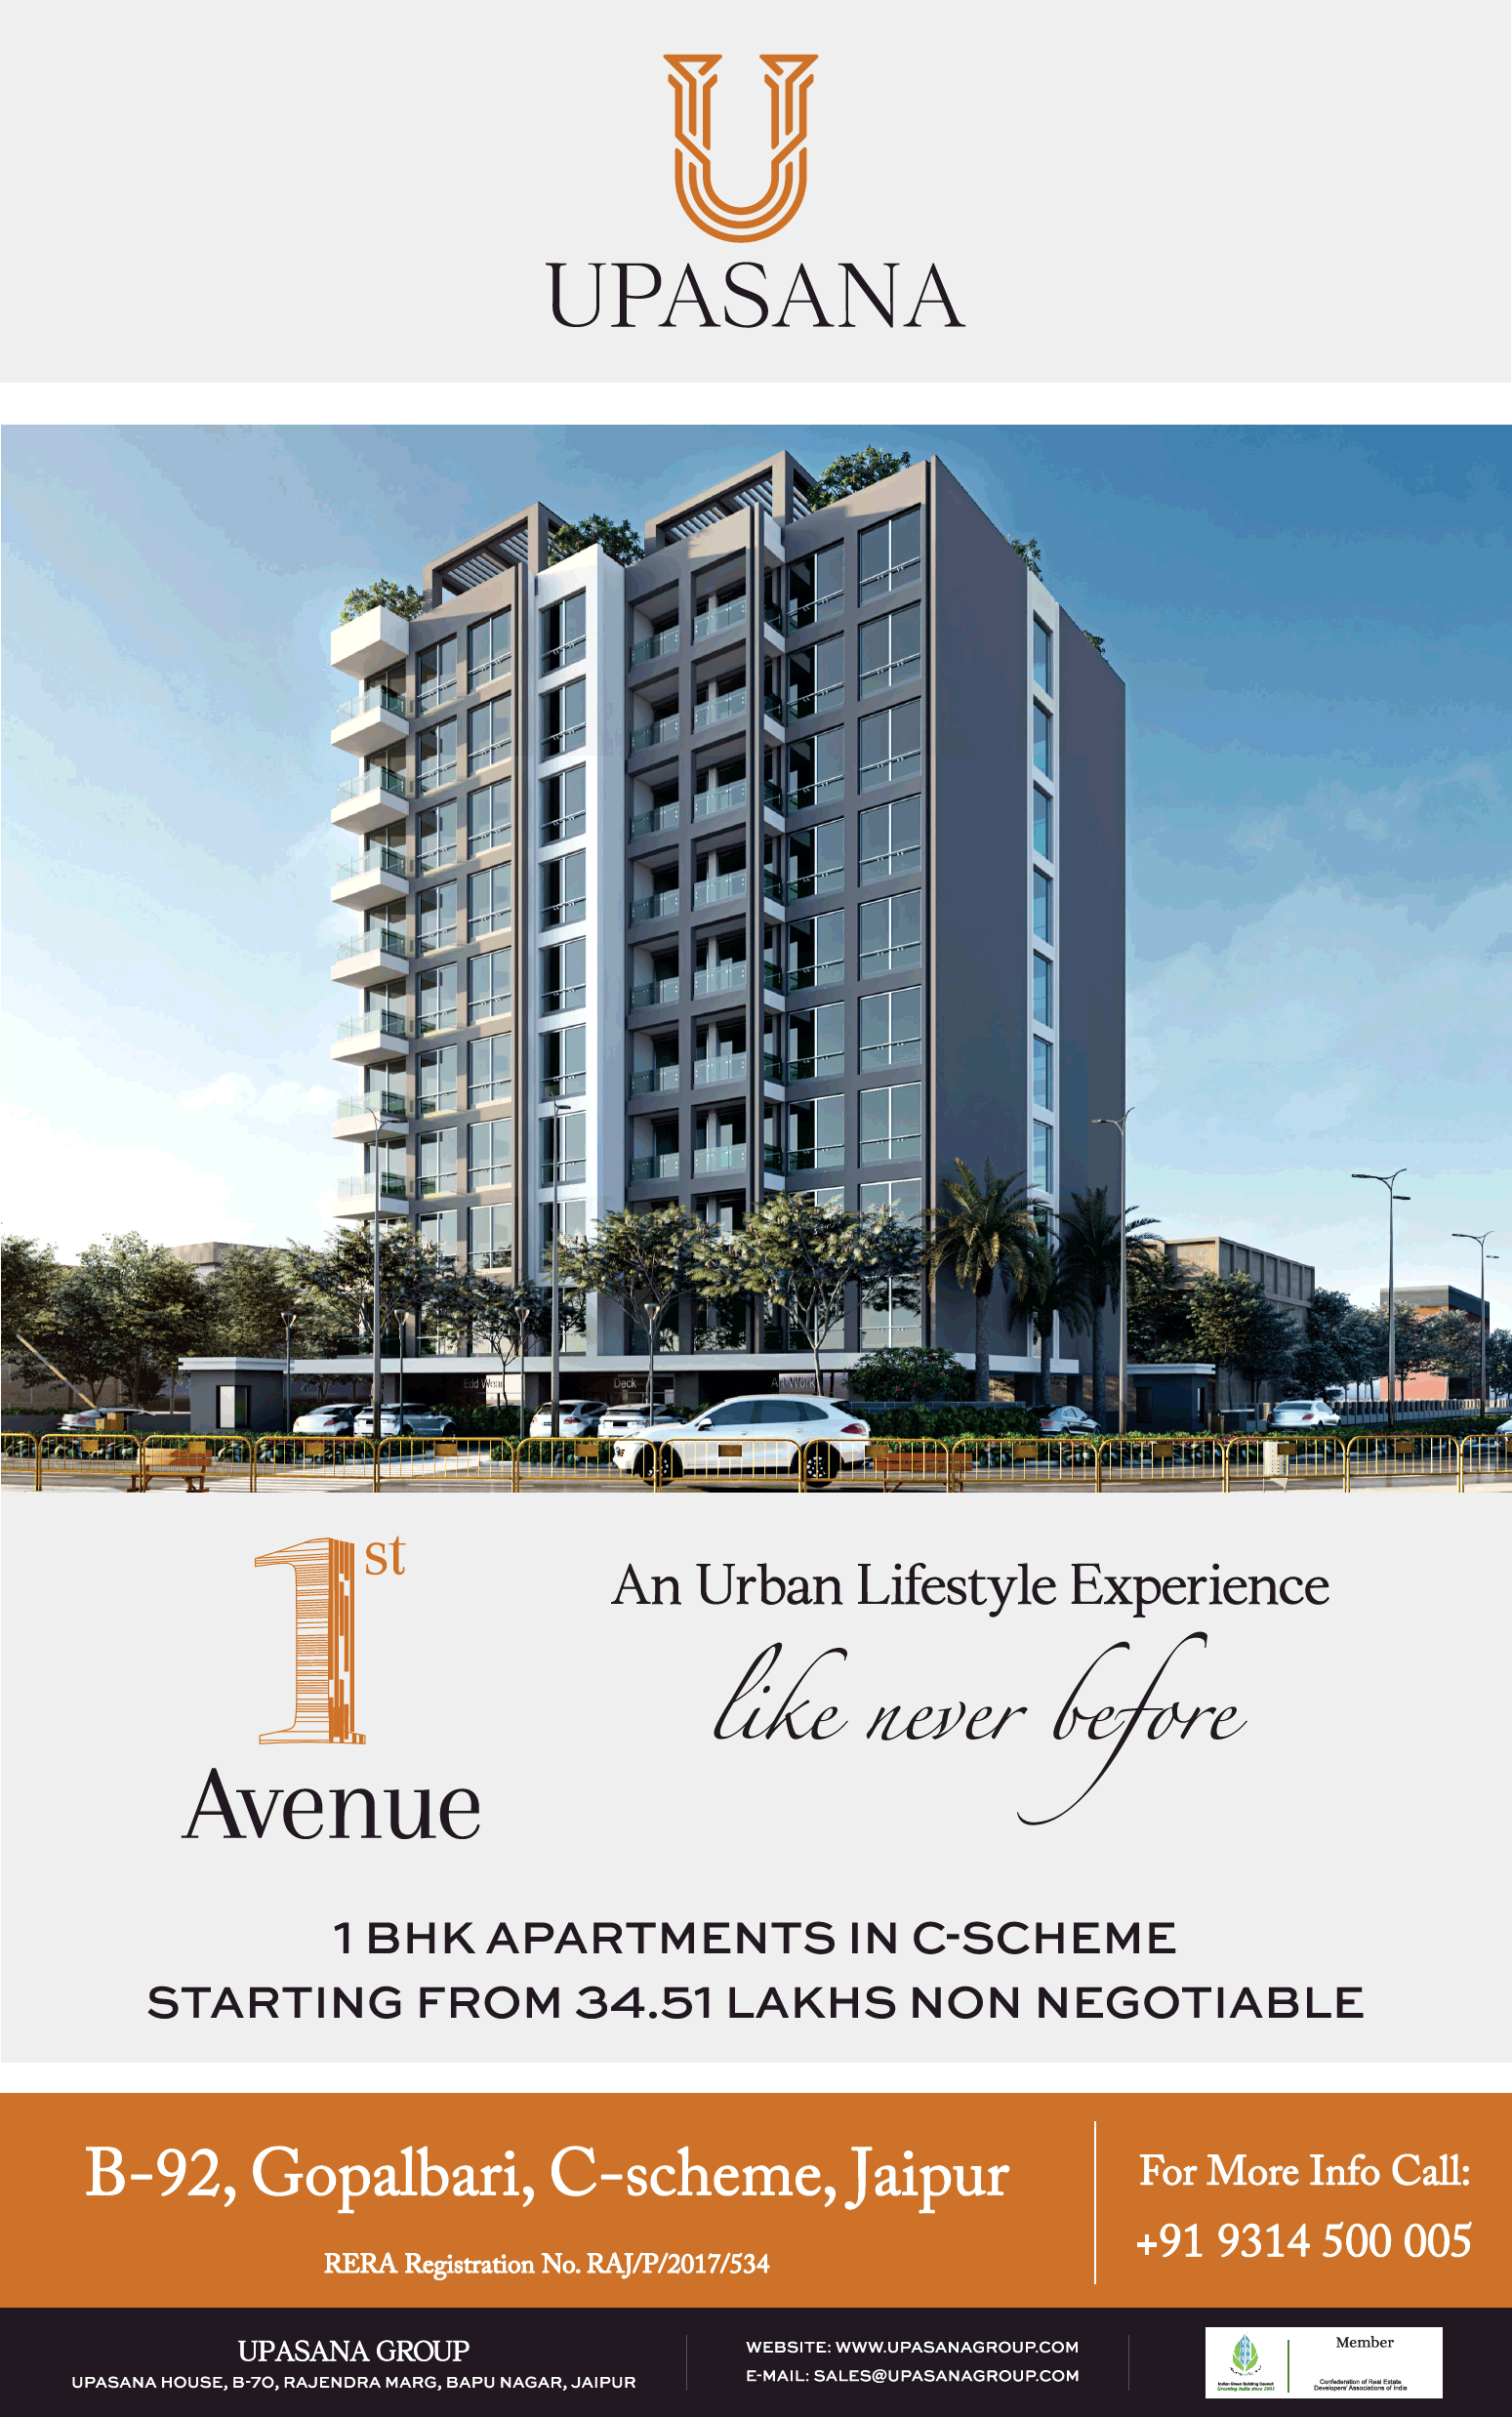 upasana-an-urban-lifestyle-experience-like-never-before-ad-times-of-india-jaipur-14-03-2019.png